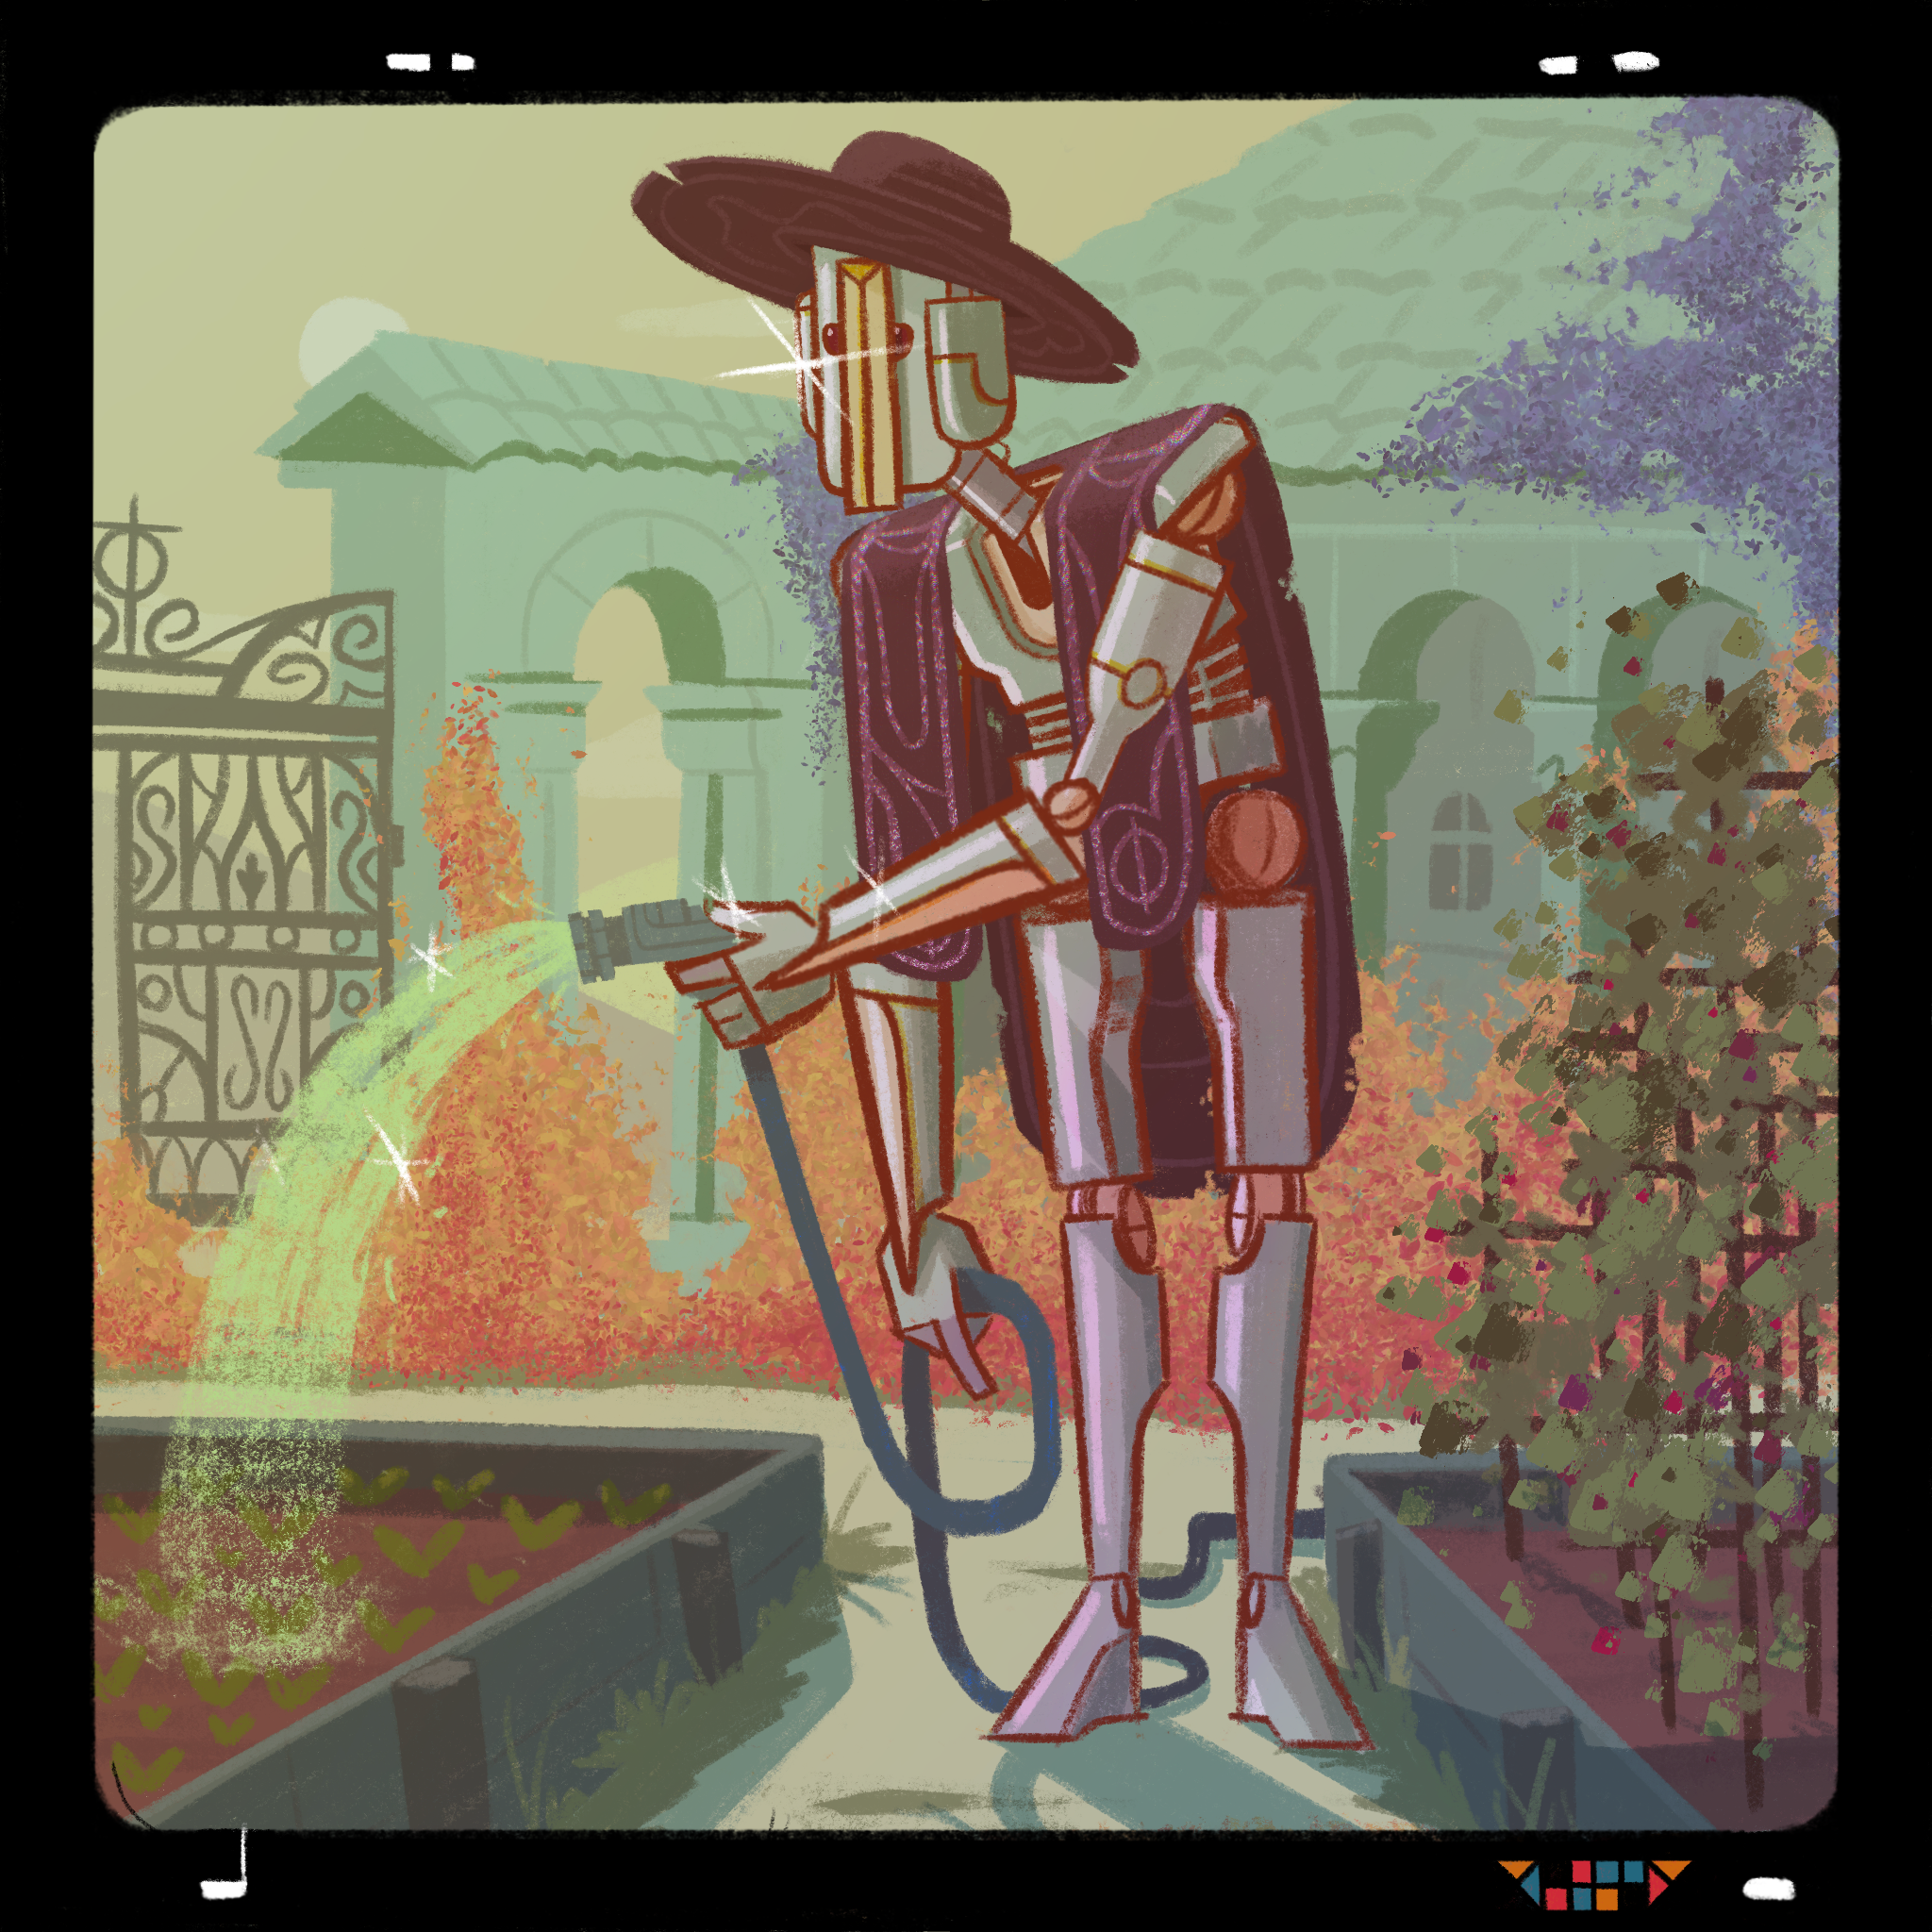 A digital drawing of a robot in a wide brimmed hat and embroidered stole watering a garden with a hose.